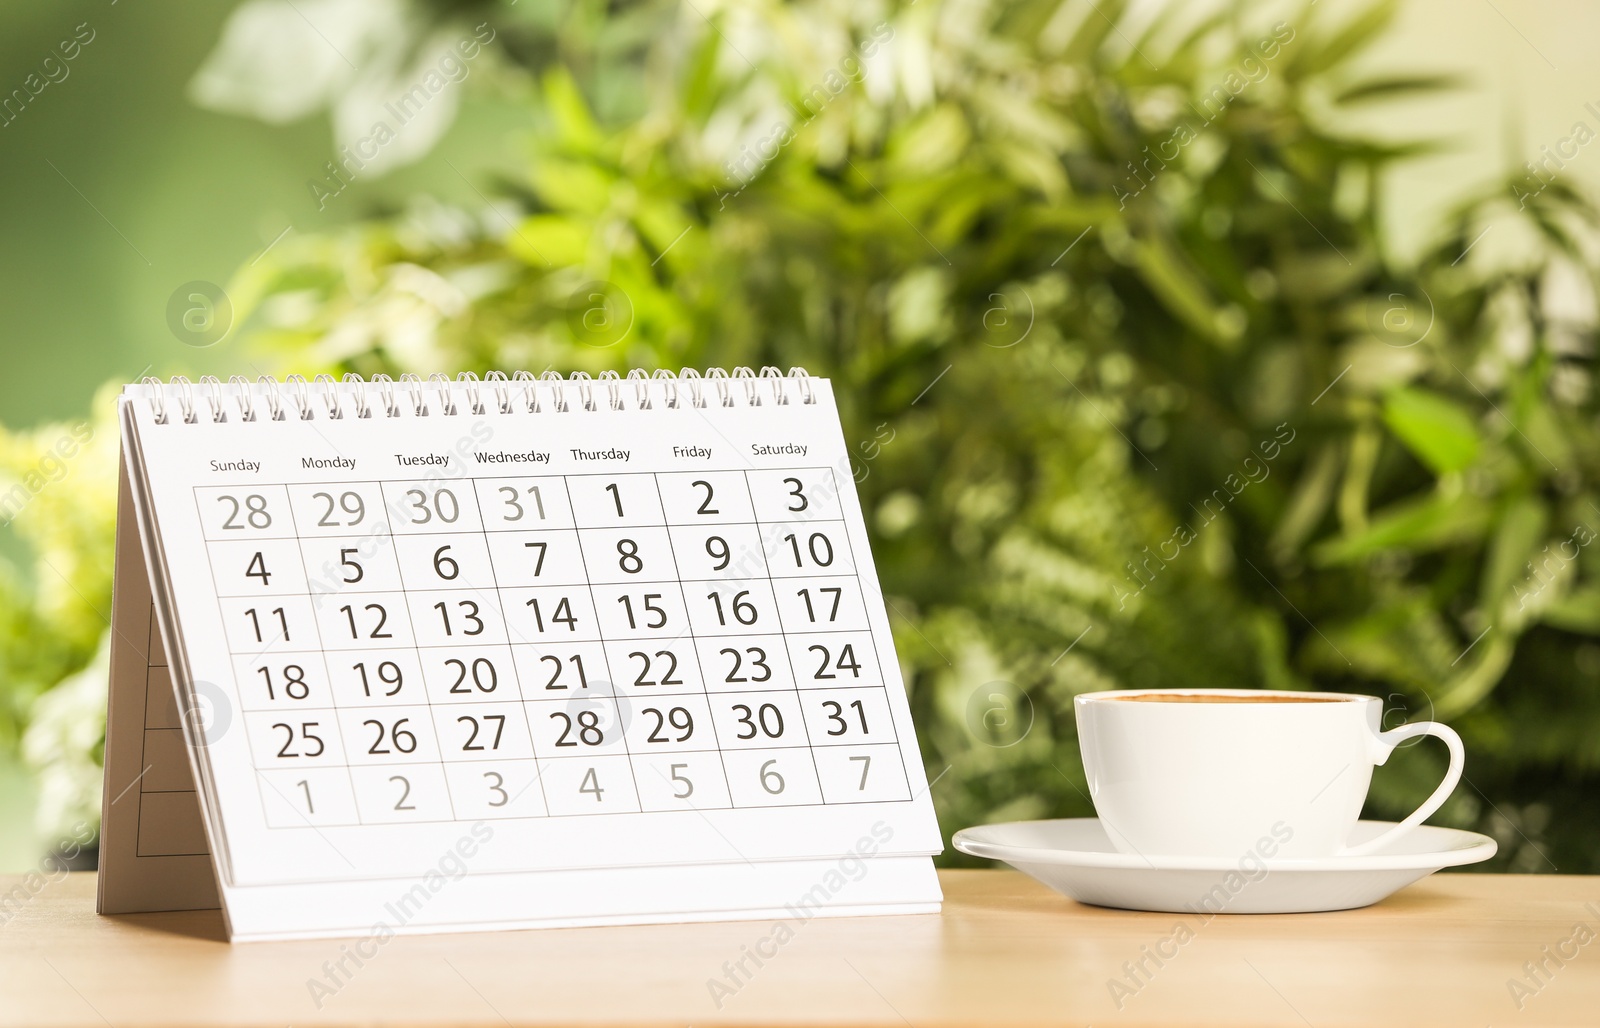 Photo of Calendar and cup of coffee on wooden table against blurred background